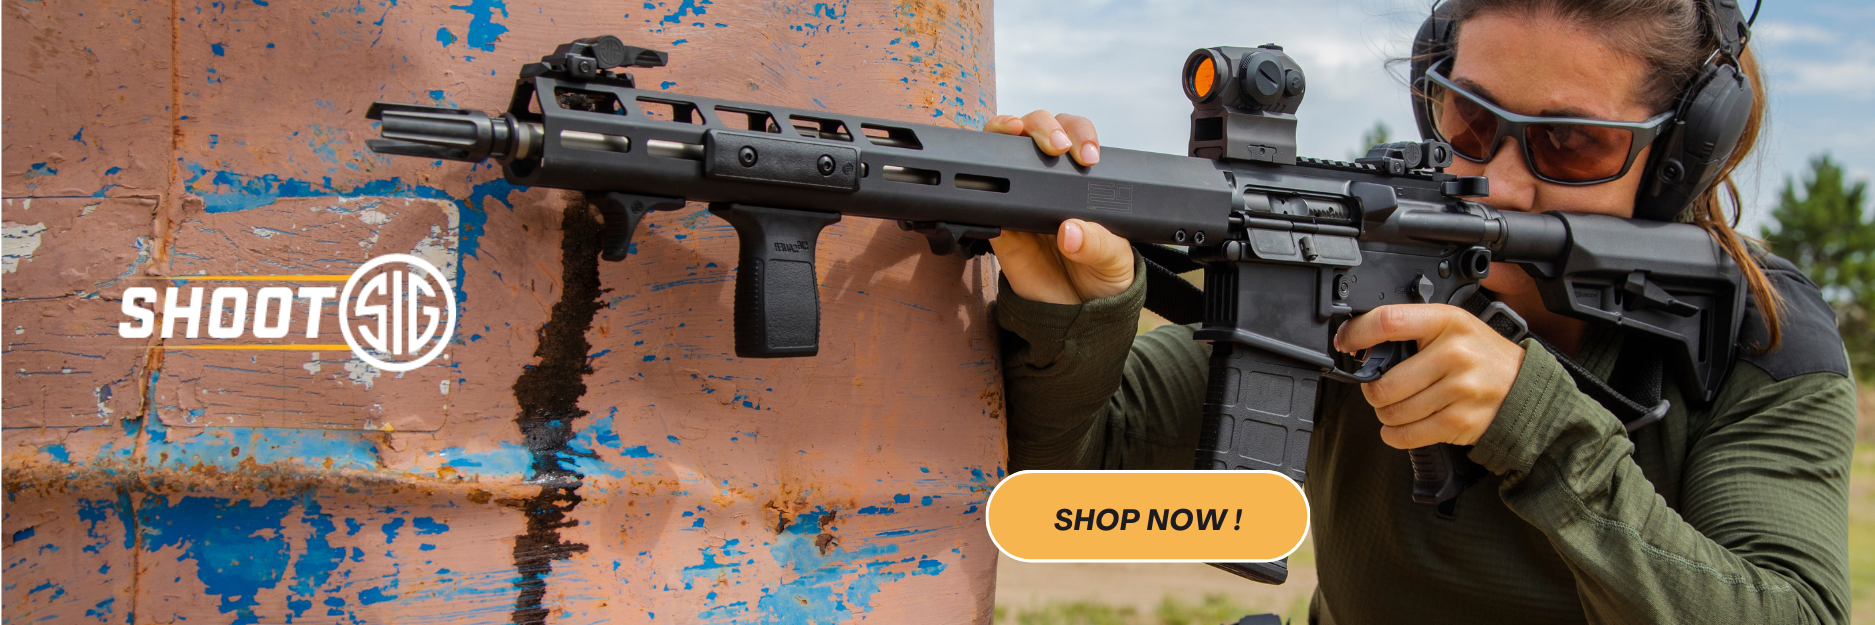 https://store.22three.com/brands/sig-sauer?select_out_of_stock=&category_id=96526%2C96538%2C129614&page=1